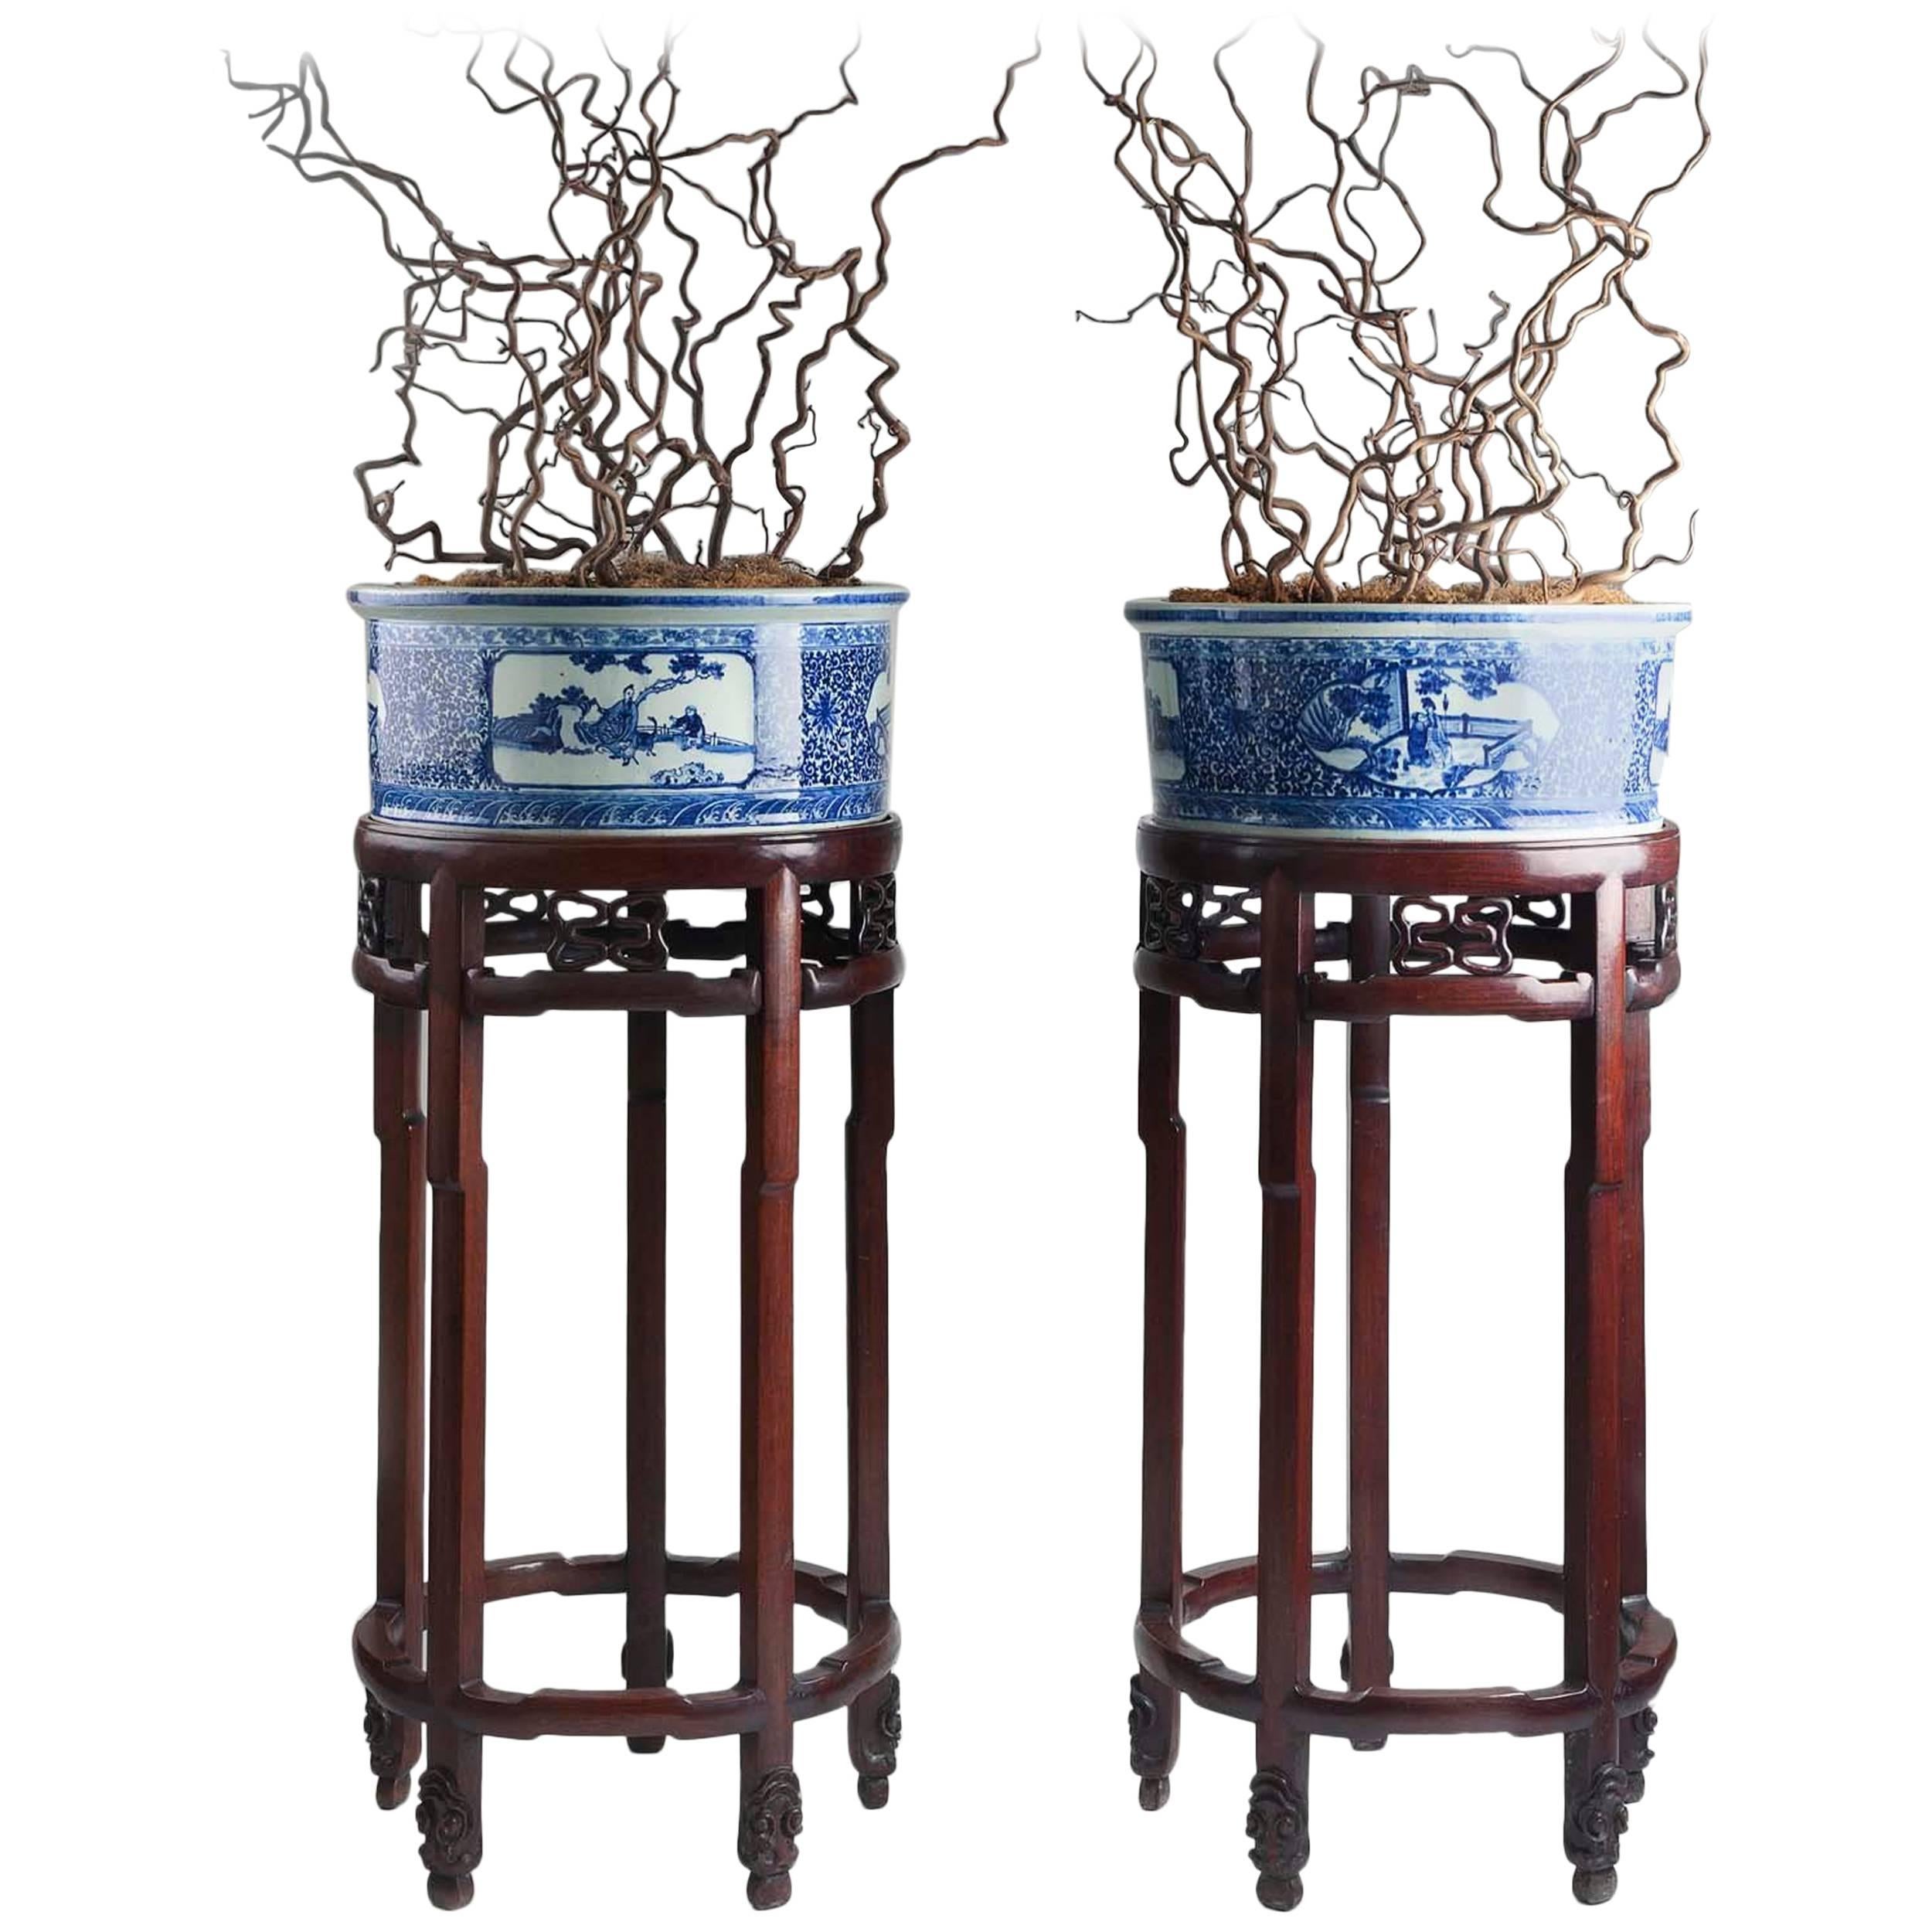 Exceptional Chinese Porcelain Planters, circa 1925